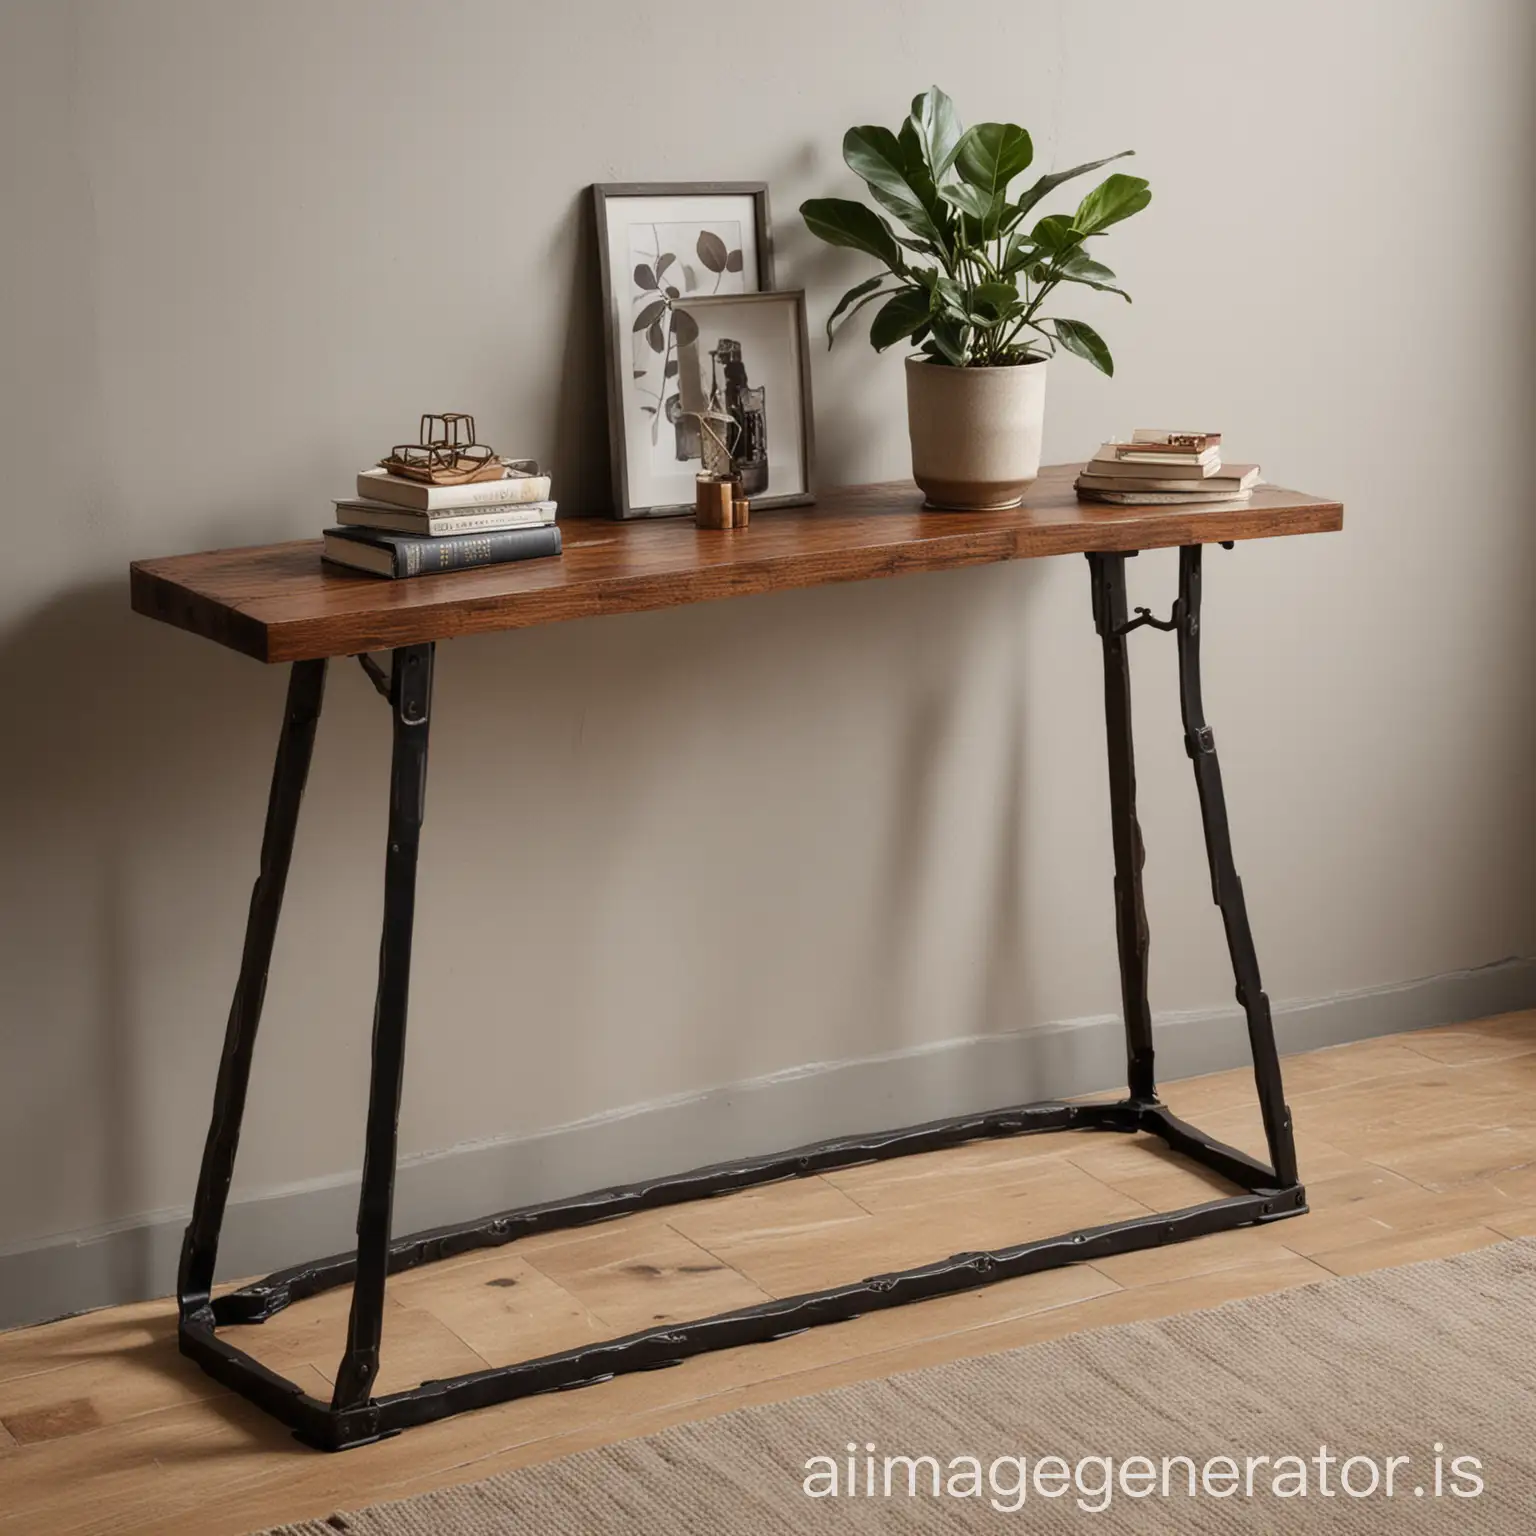 Industrial-Aesthetic-Console-Table-Inspired-by-Coffee-Beans